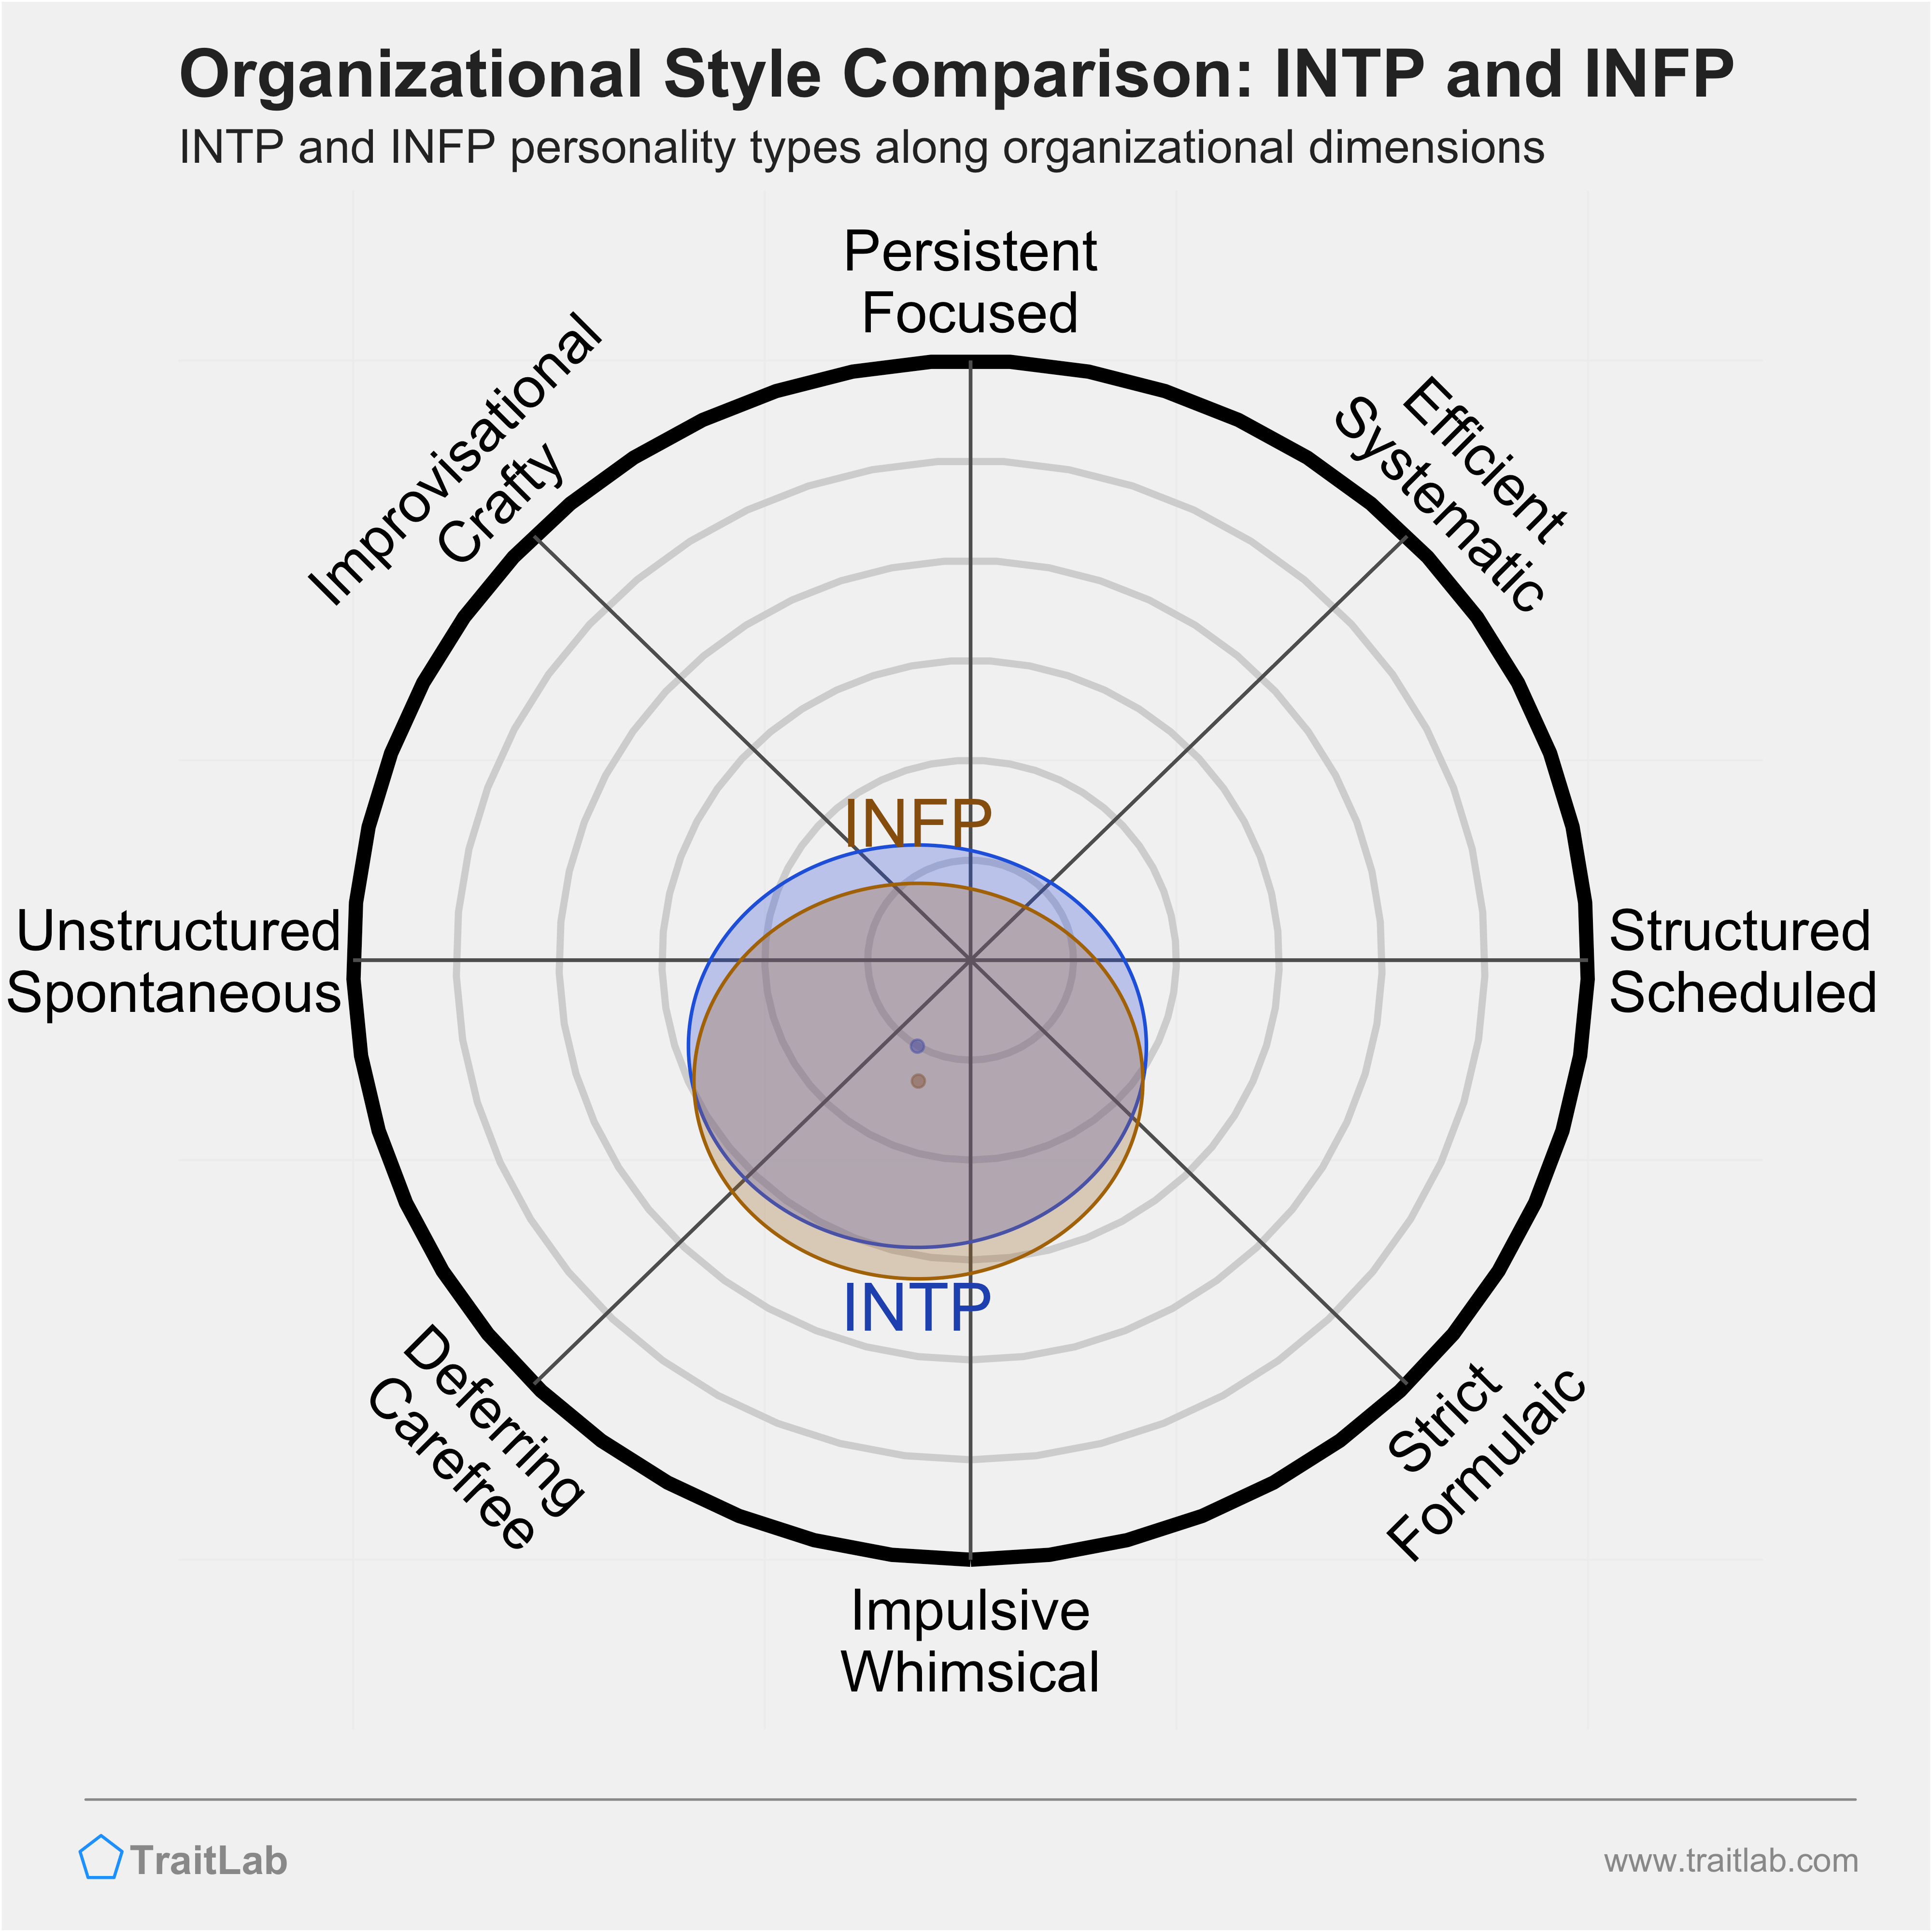 INTP and INFP comparison across organizational dimensions